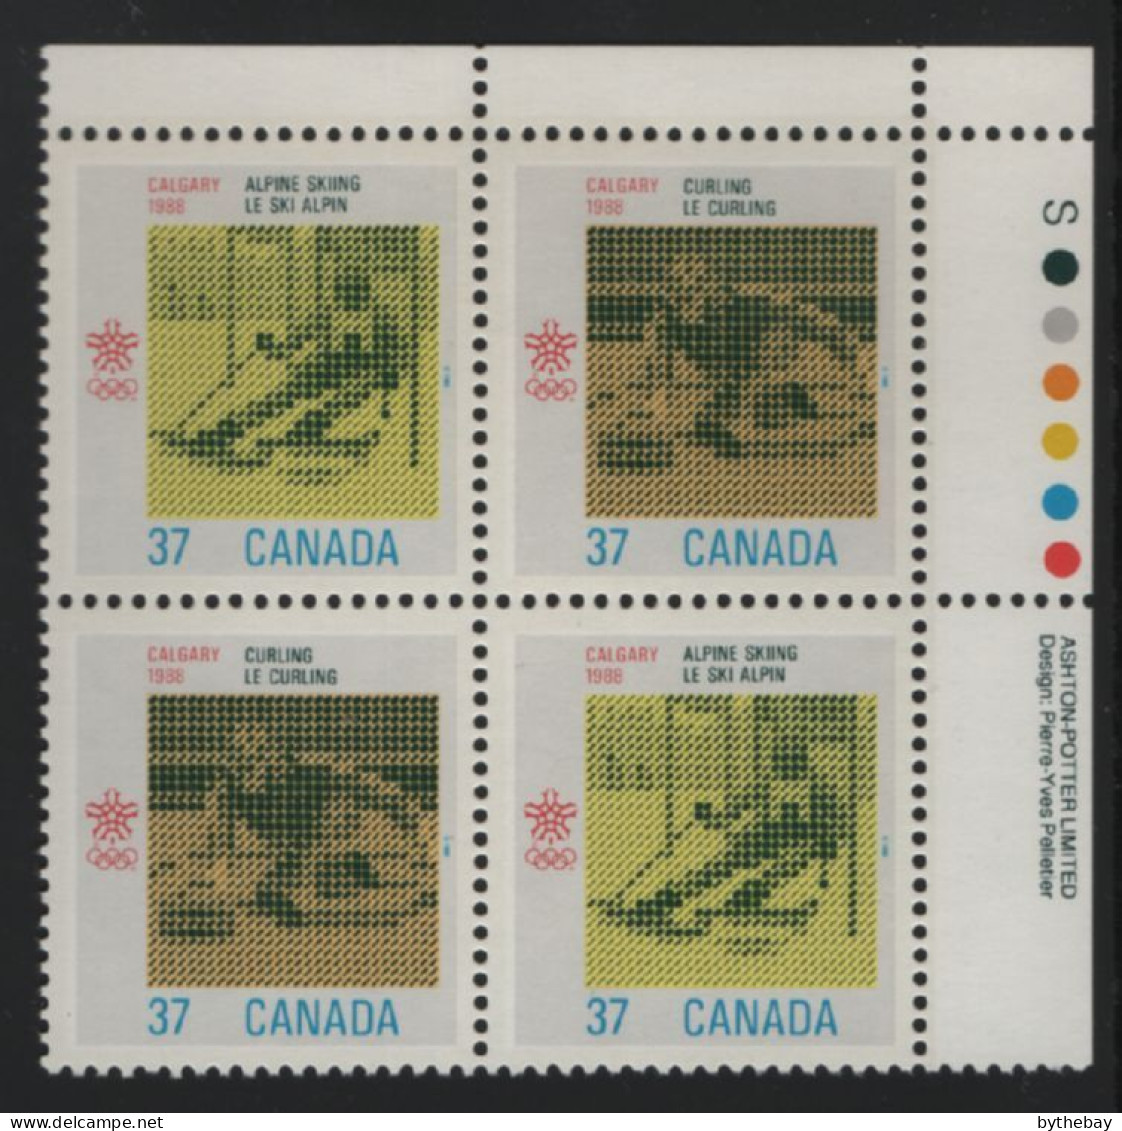 Canada 1988 MNH Sc 1196a 37c Skiing, Curling UR Plate Block - Plate Number & Inscriptions